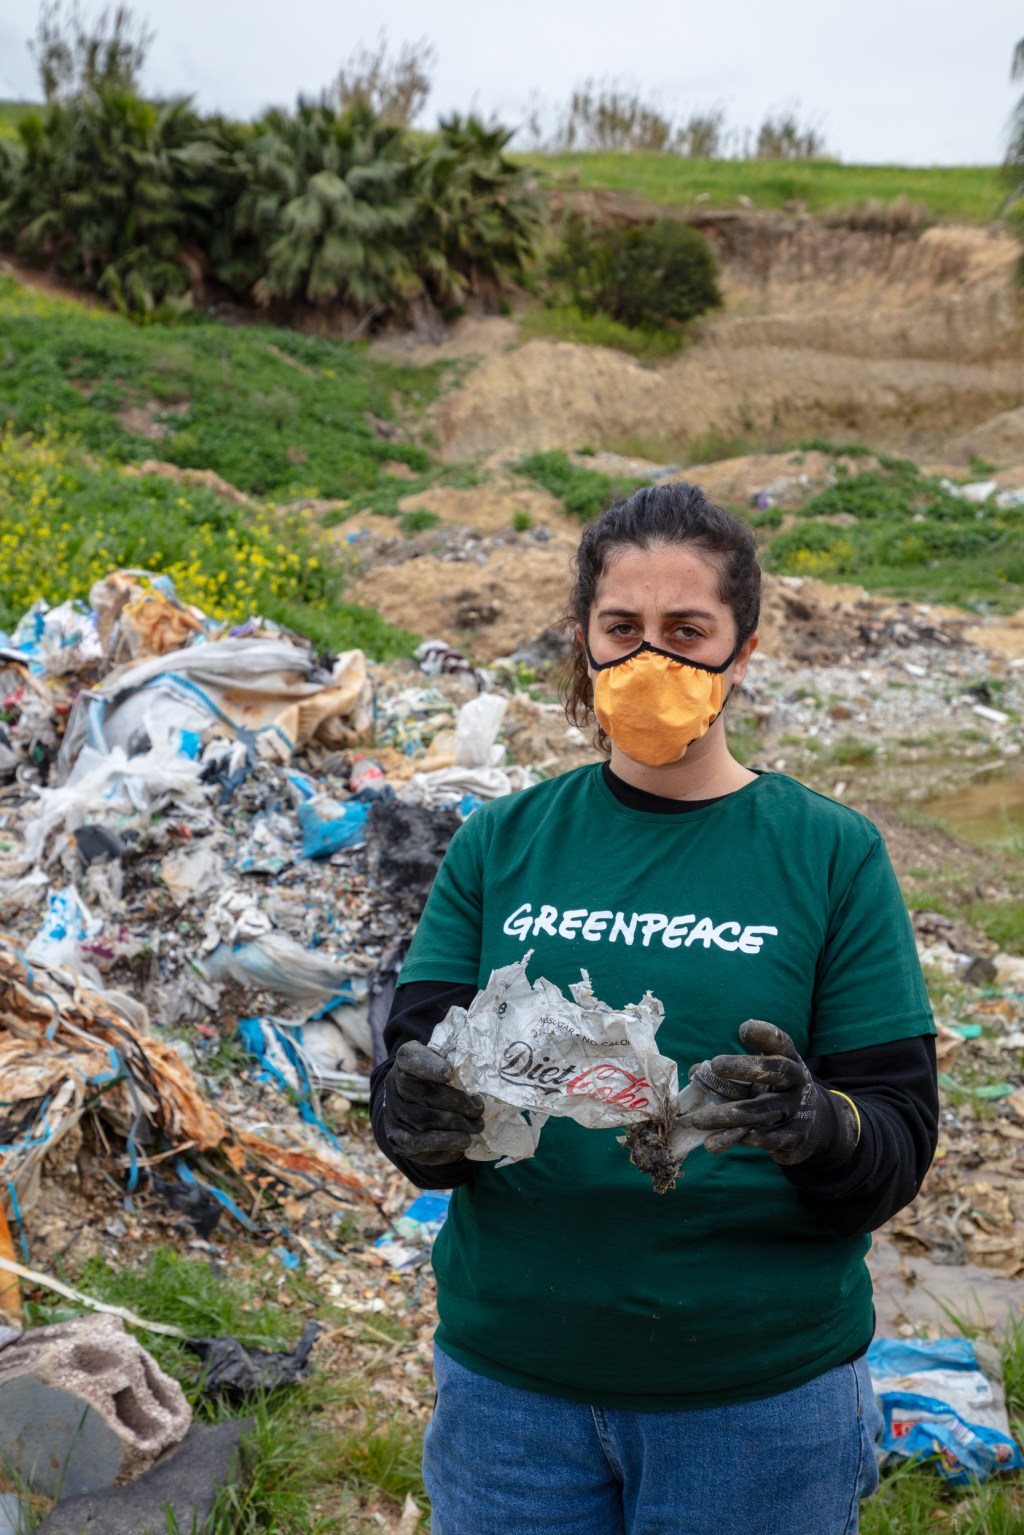 Adana Karahan Investigation into plastic waste that is dumped and burned in Turkey. The team found plastic packaging from UK, German and global food and drinks brands and supermarkets. Image credit: Greenpeace